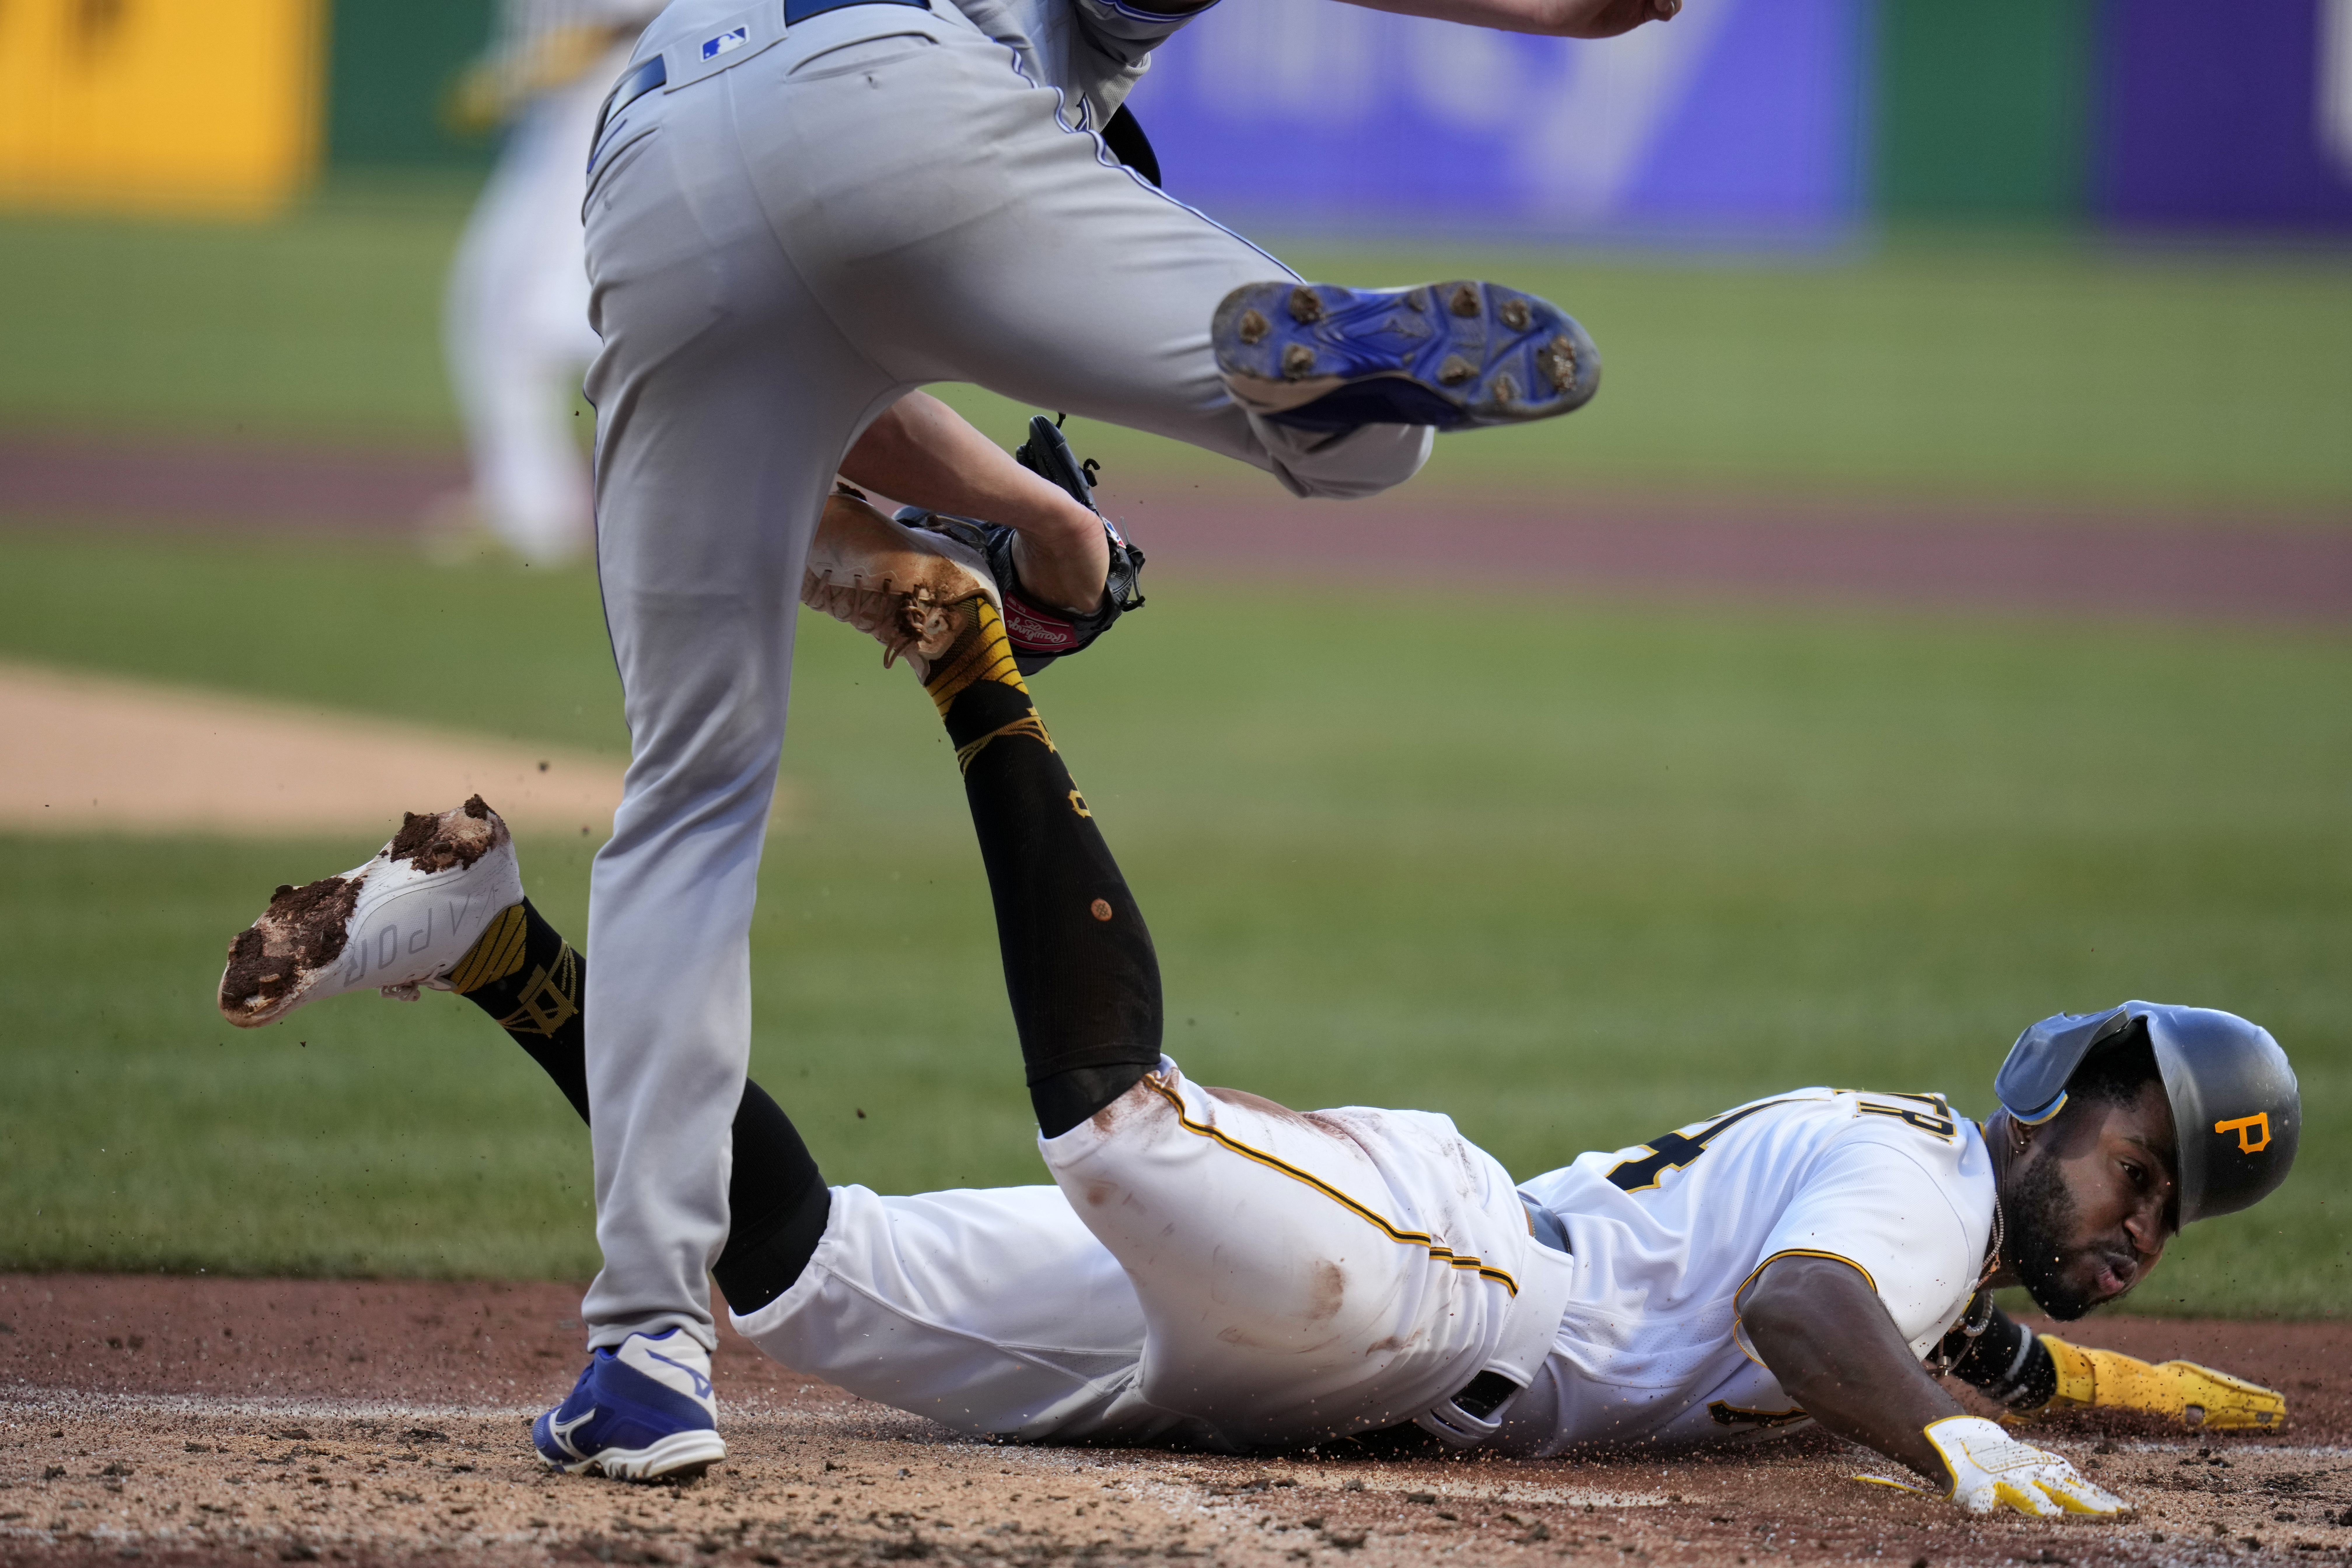 Whit Merrifield drives in four runs, Blue Jays sweep Pirates